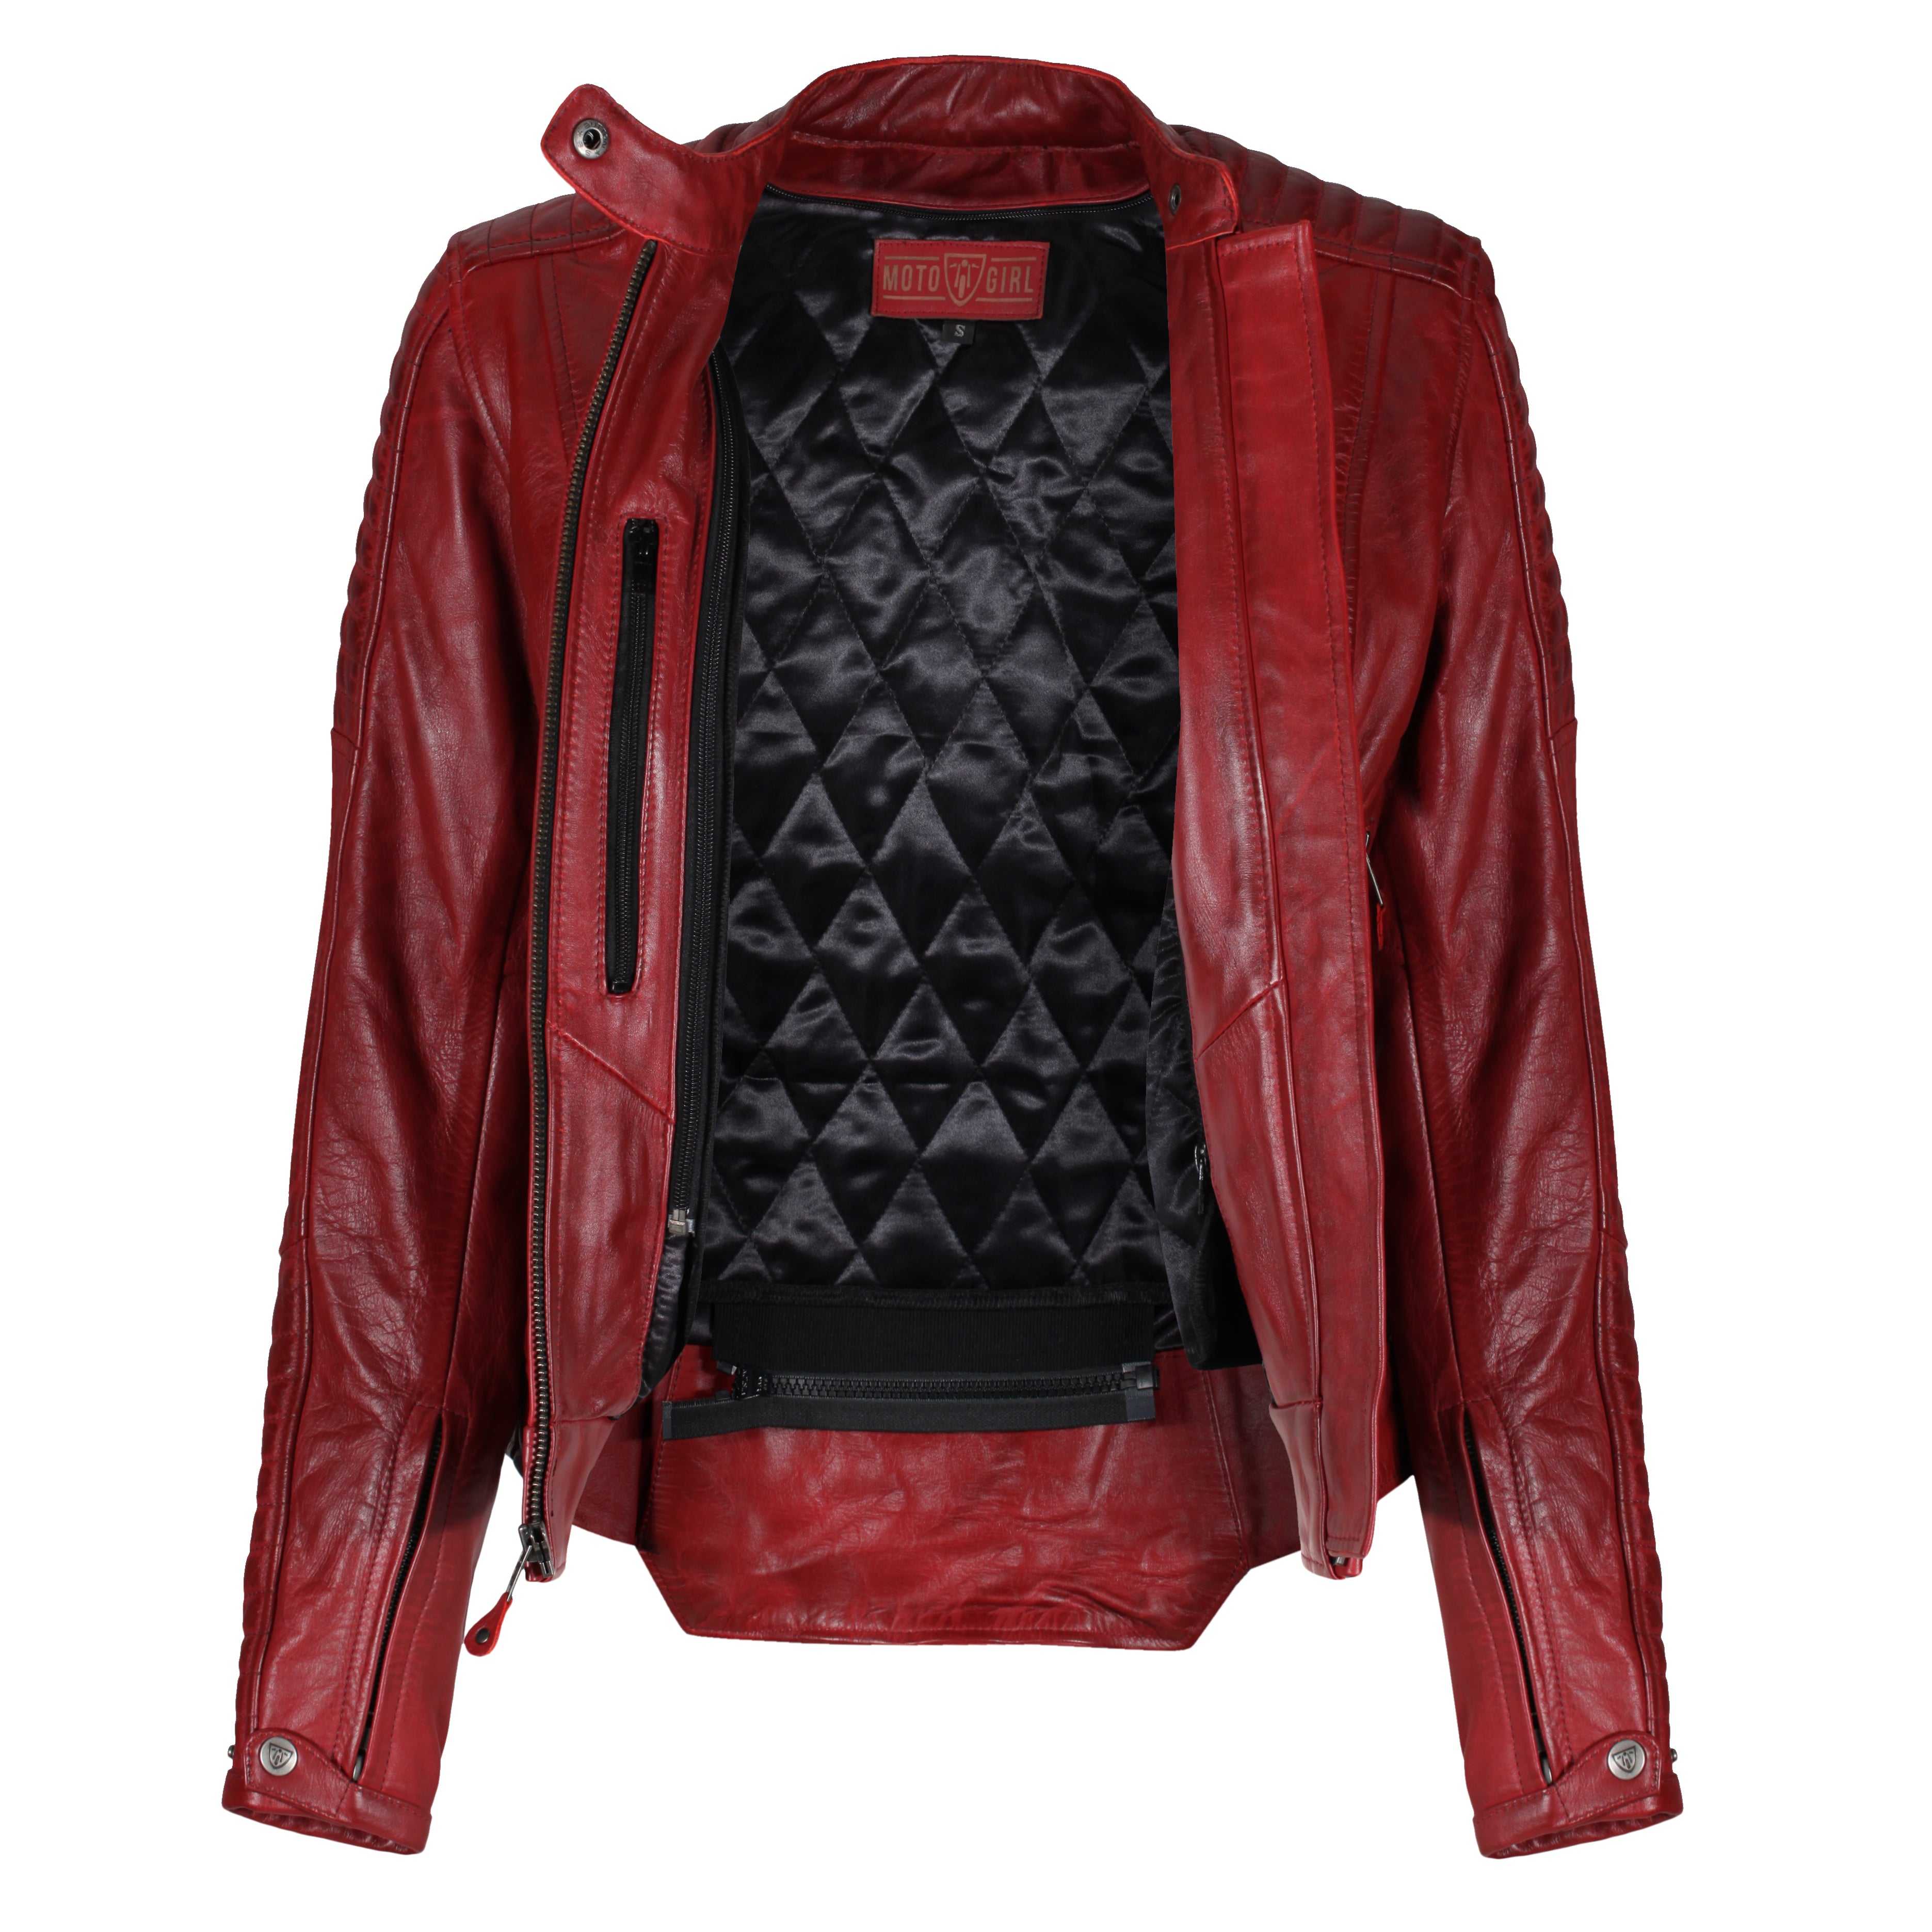 Unzipped red Valerie motorcycle leather jacket from Moto Girl